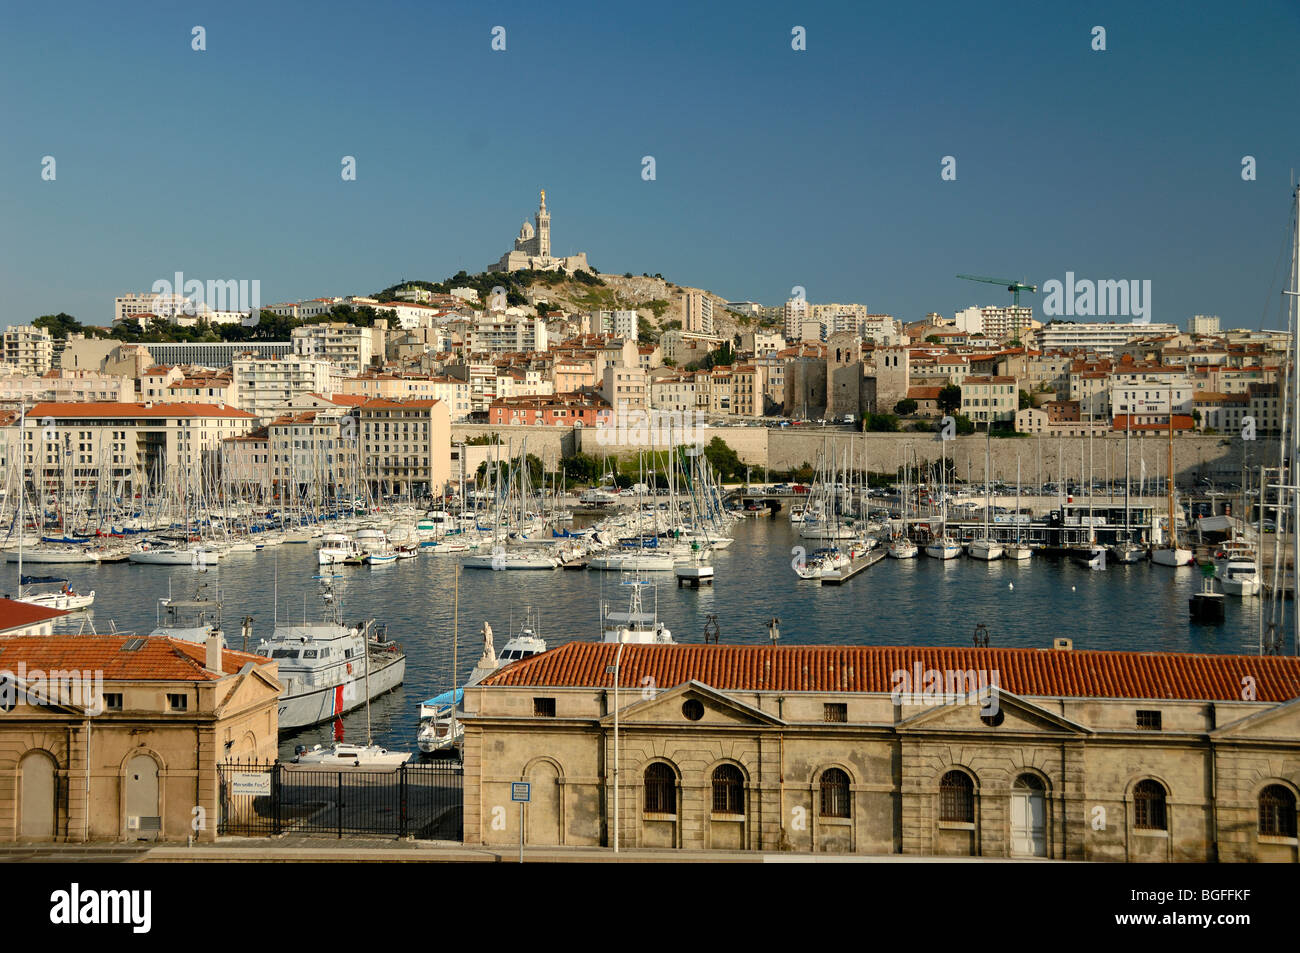 Townscape Skyline, Panorama or Panoramic View over the Vieux Port, Old Port, Harbour or Harbor, Marseille or Marseilles, Provence, France Stock Photo